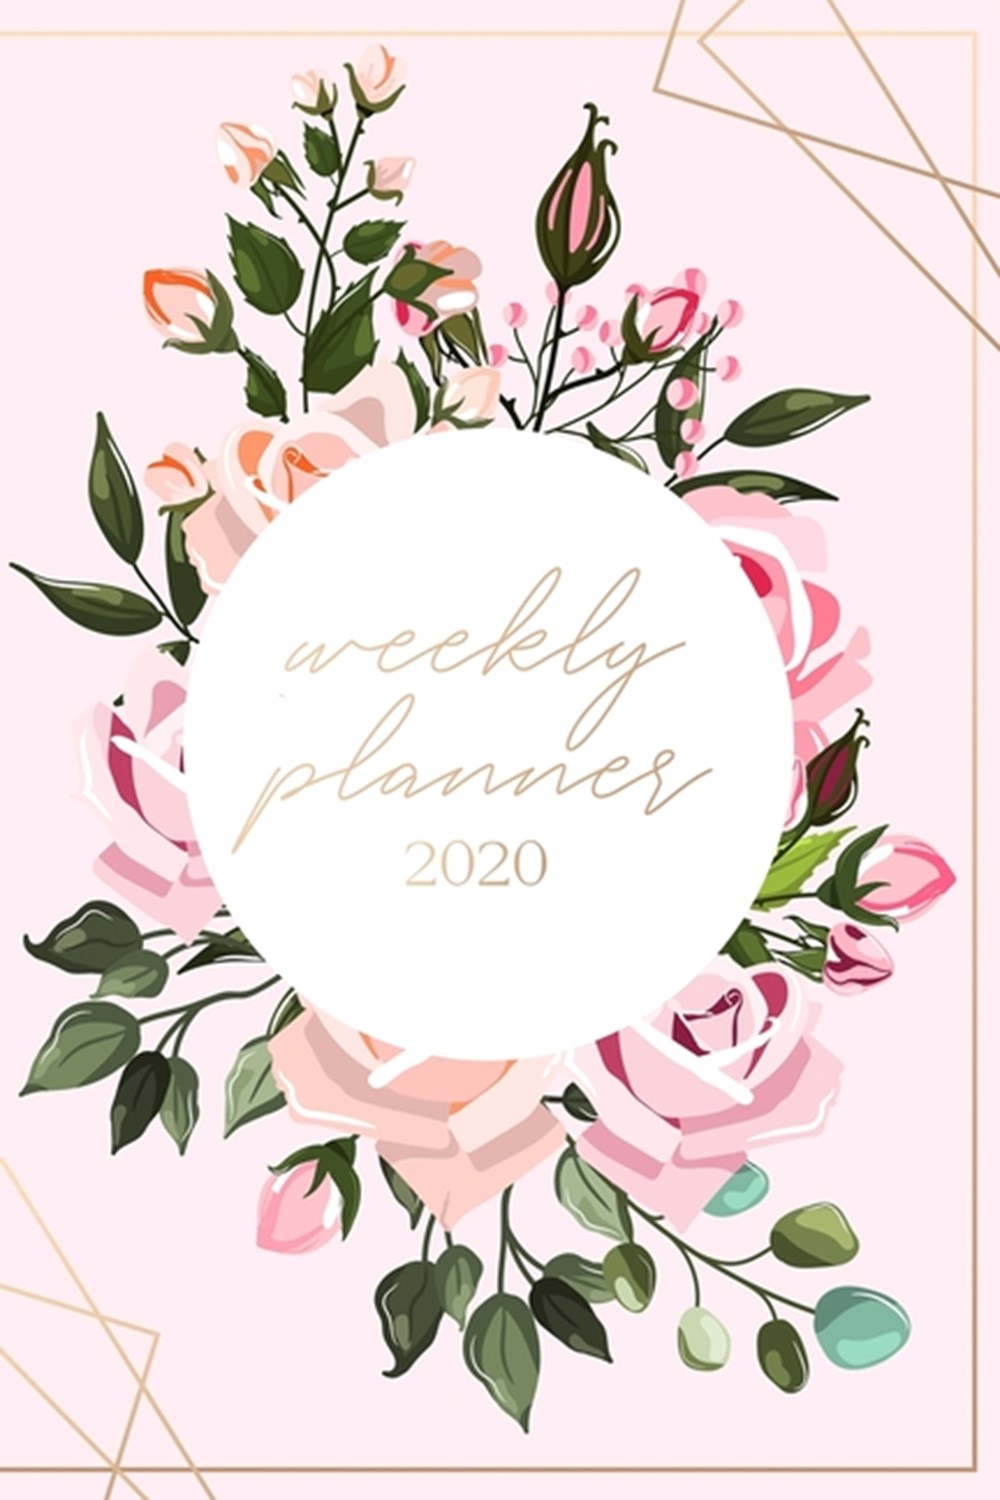 Weekly Planner 2020 Weekly And Monthly Calendar Agenda 2020 - College, School and Academic Planner